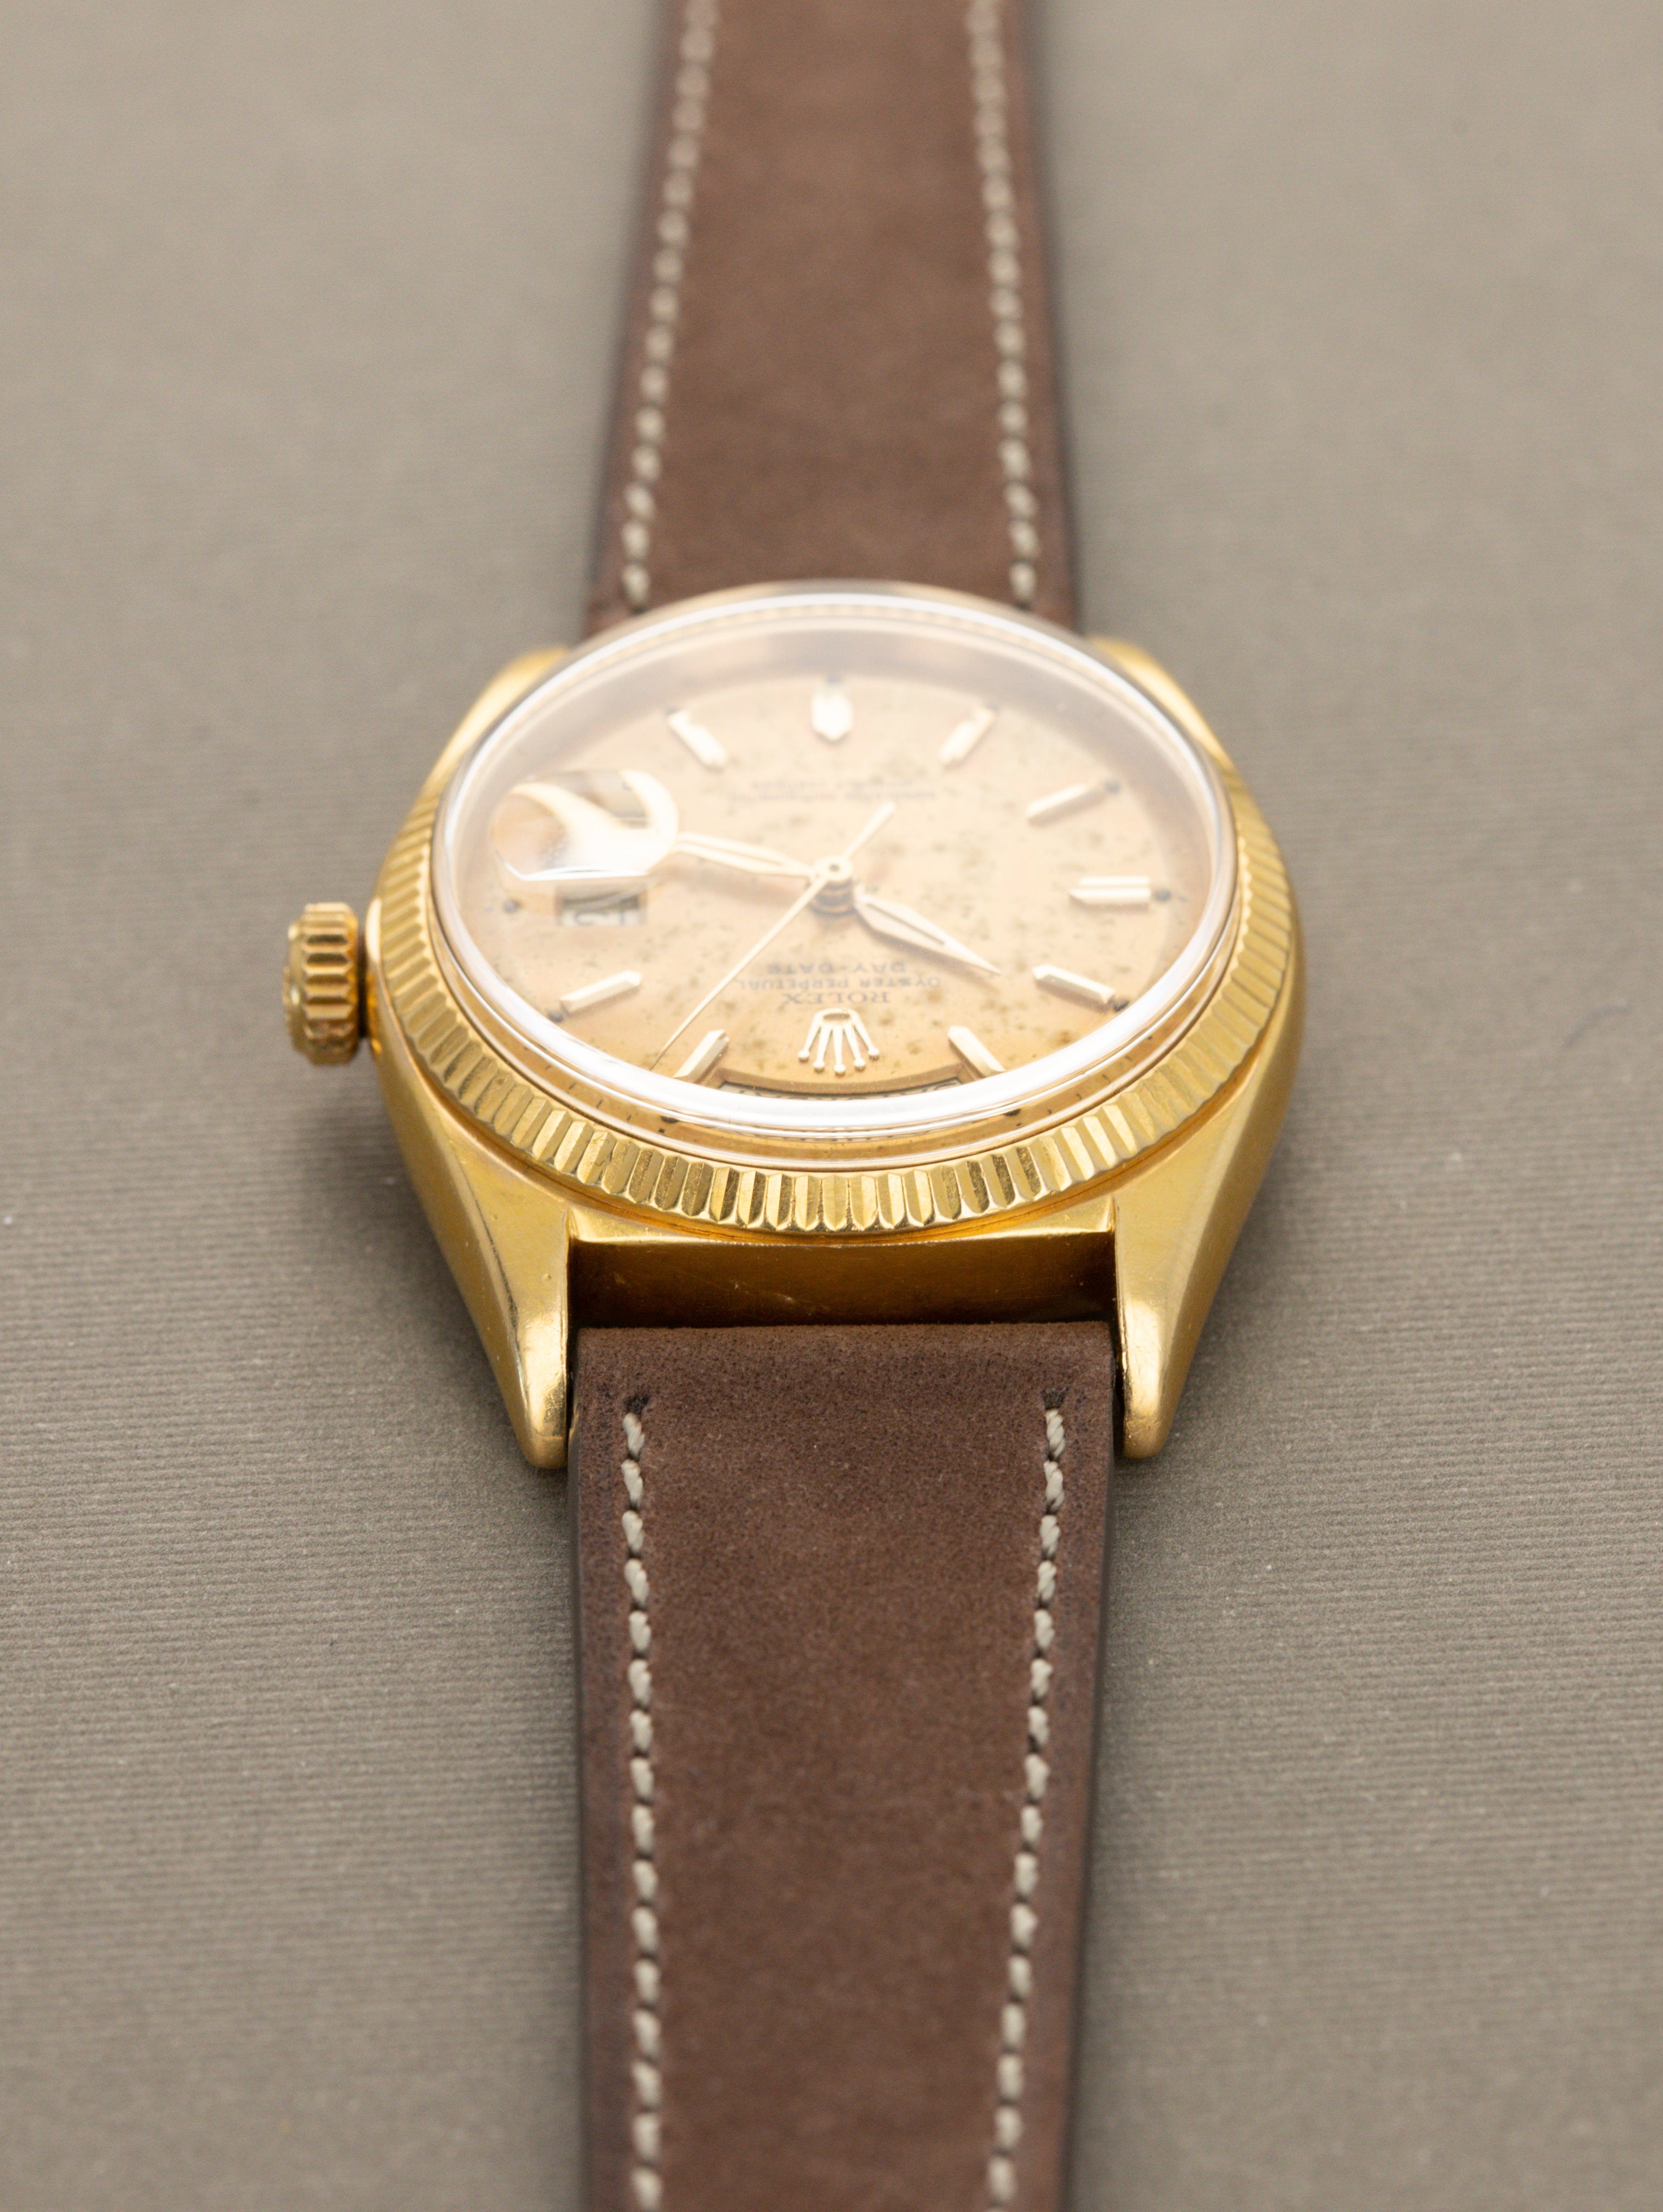 Rolex Day-Date Ref. 1803 - Early 'Alpha Hand' Example